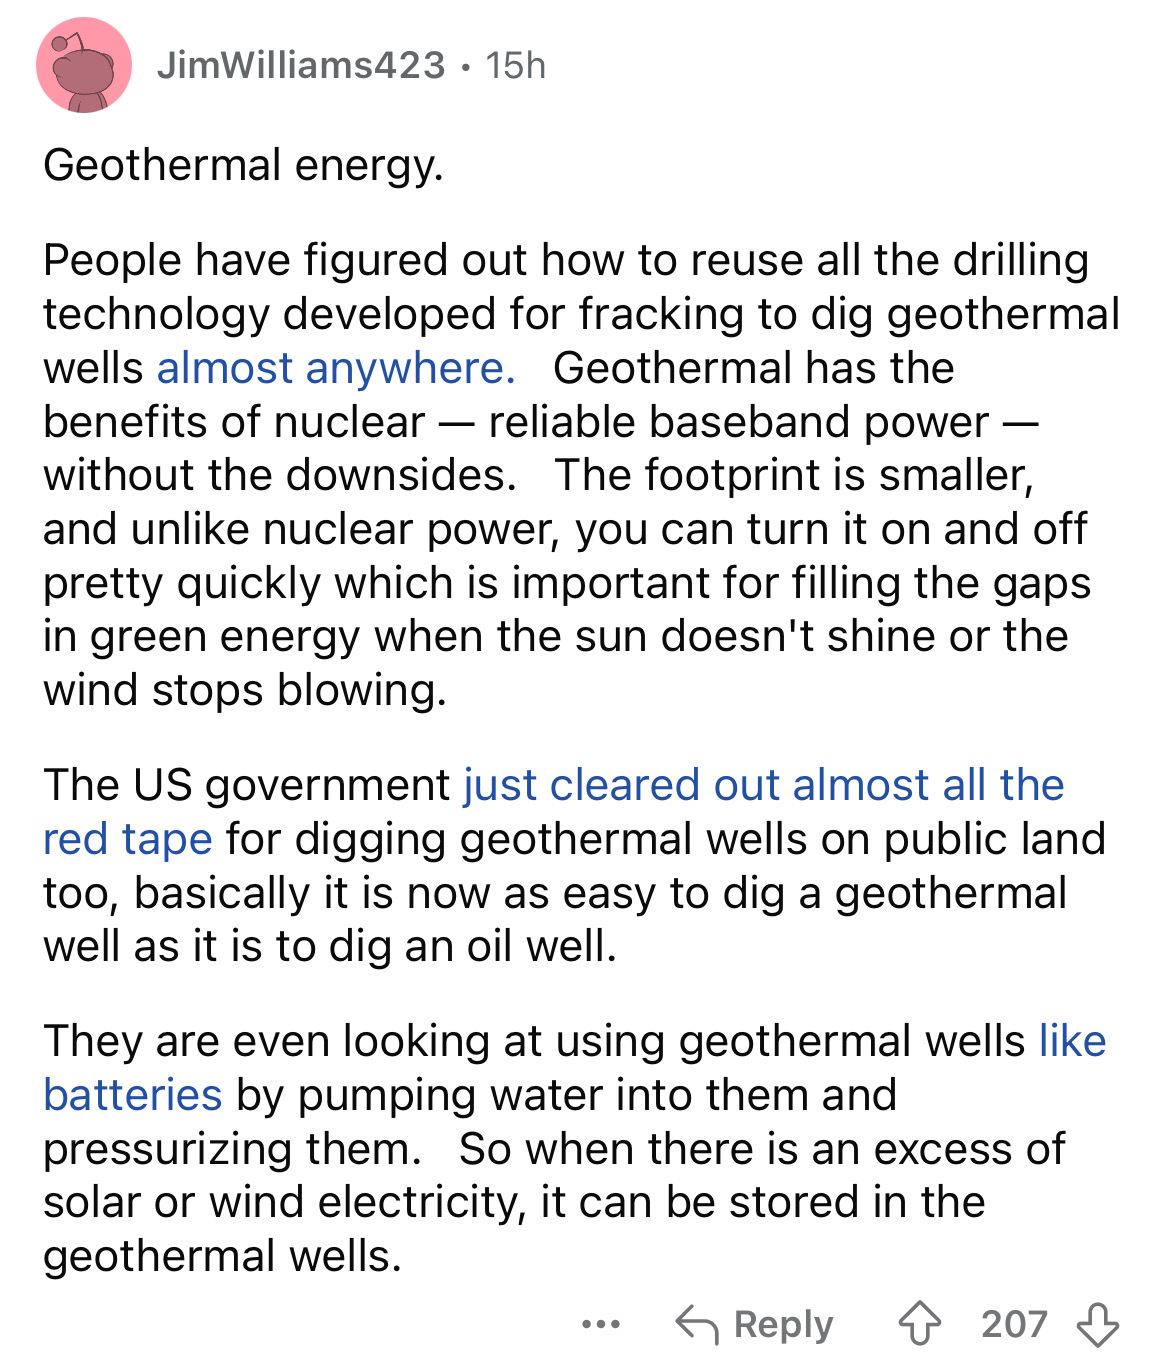 document - JimWilliams423 15h Geothermal energy. . People have figured out how to reuse all the drilling technology developed for fracking to dig geothermal wells almost anywhere. Geothermal has the benefits of nuclear reliable baseband power without the 